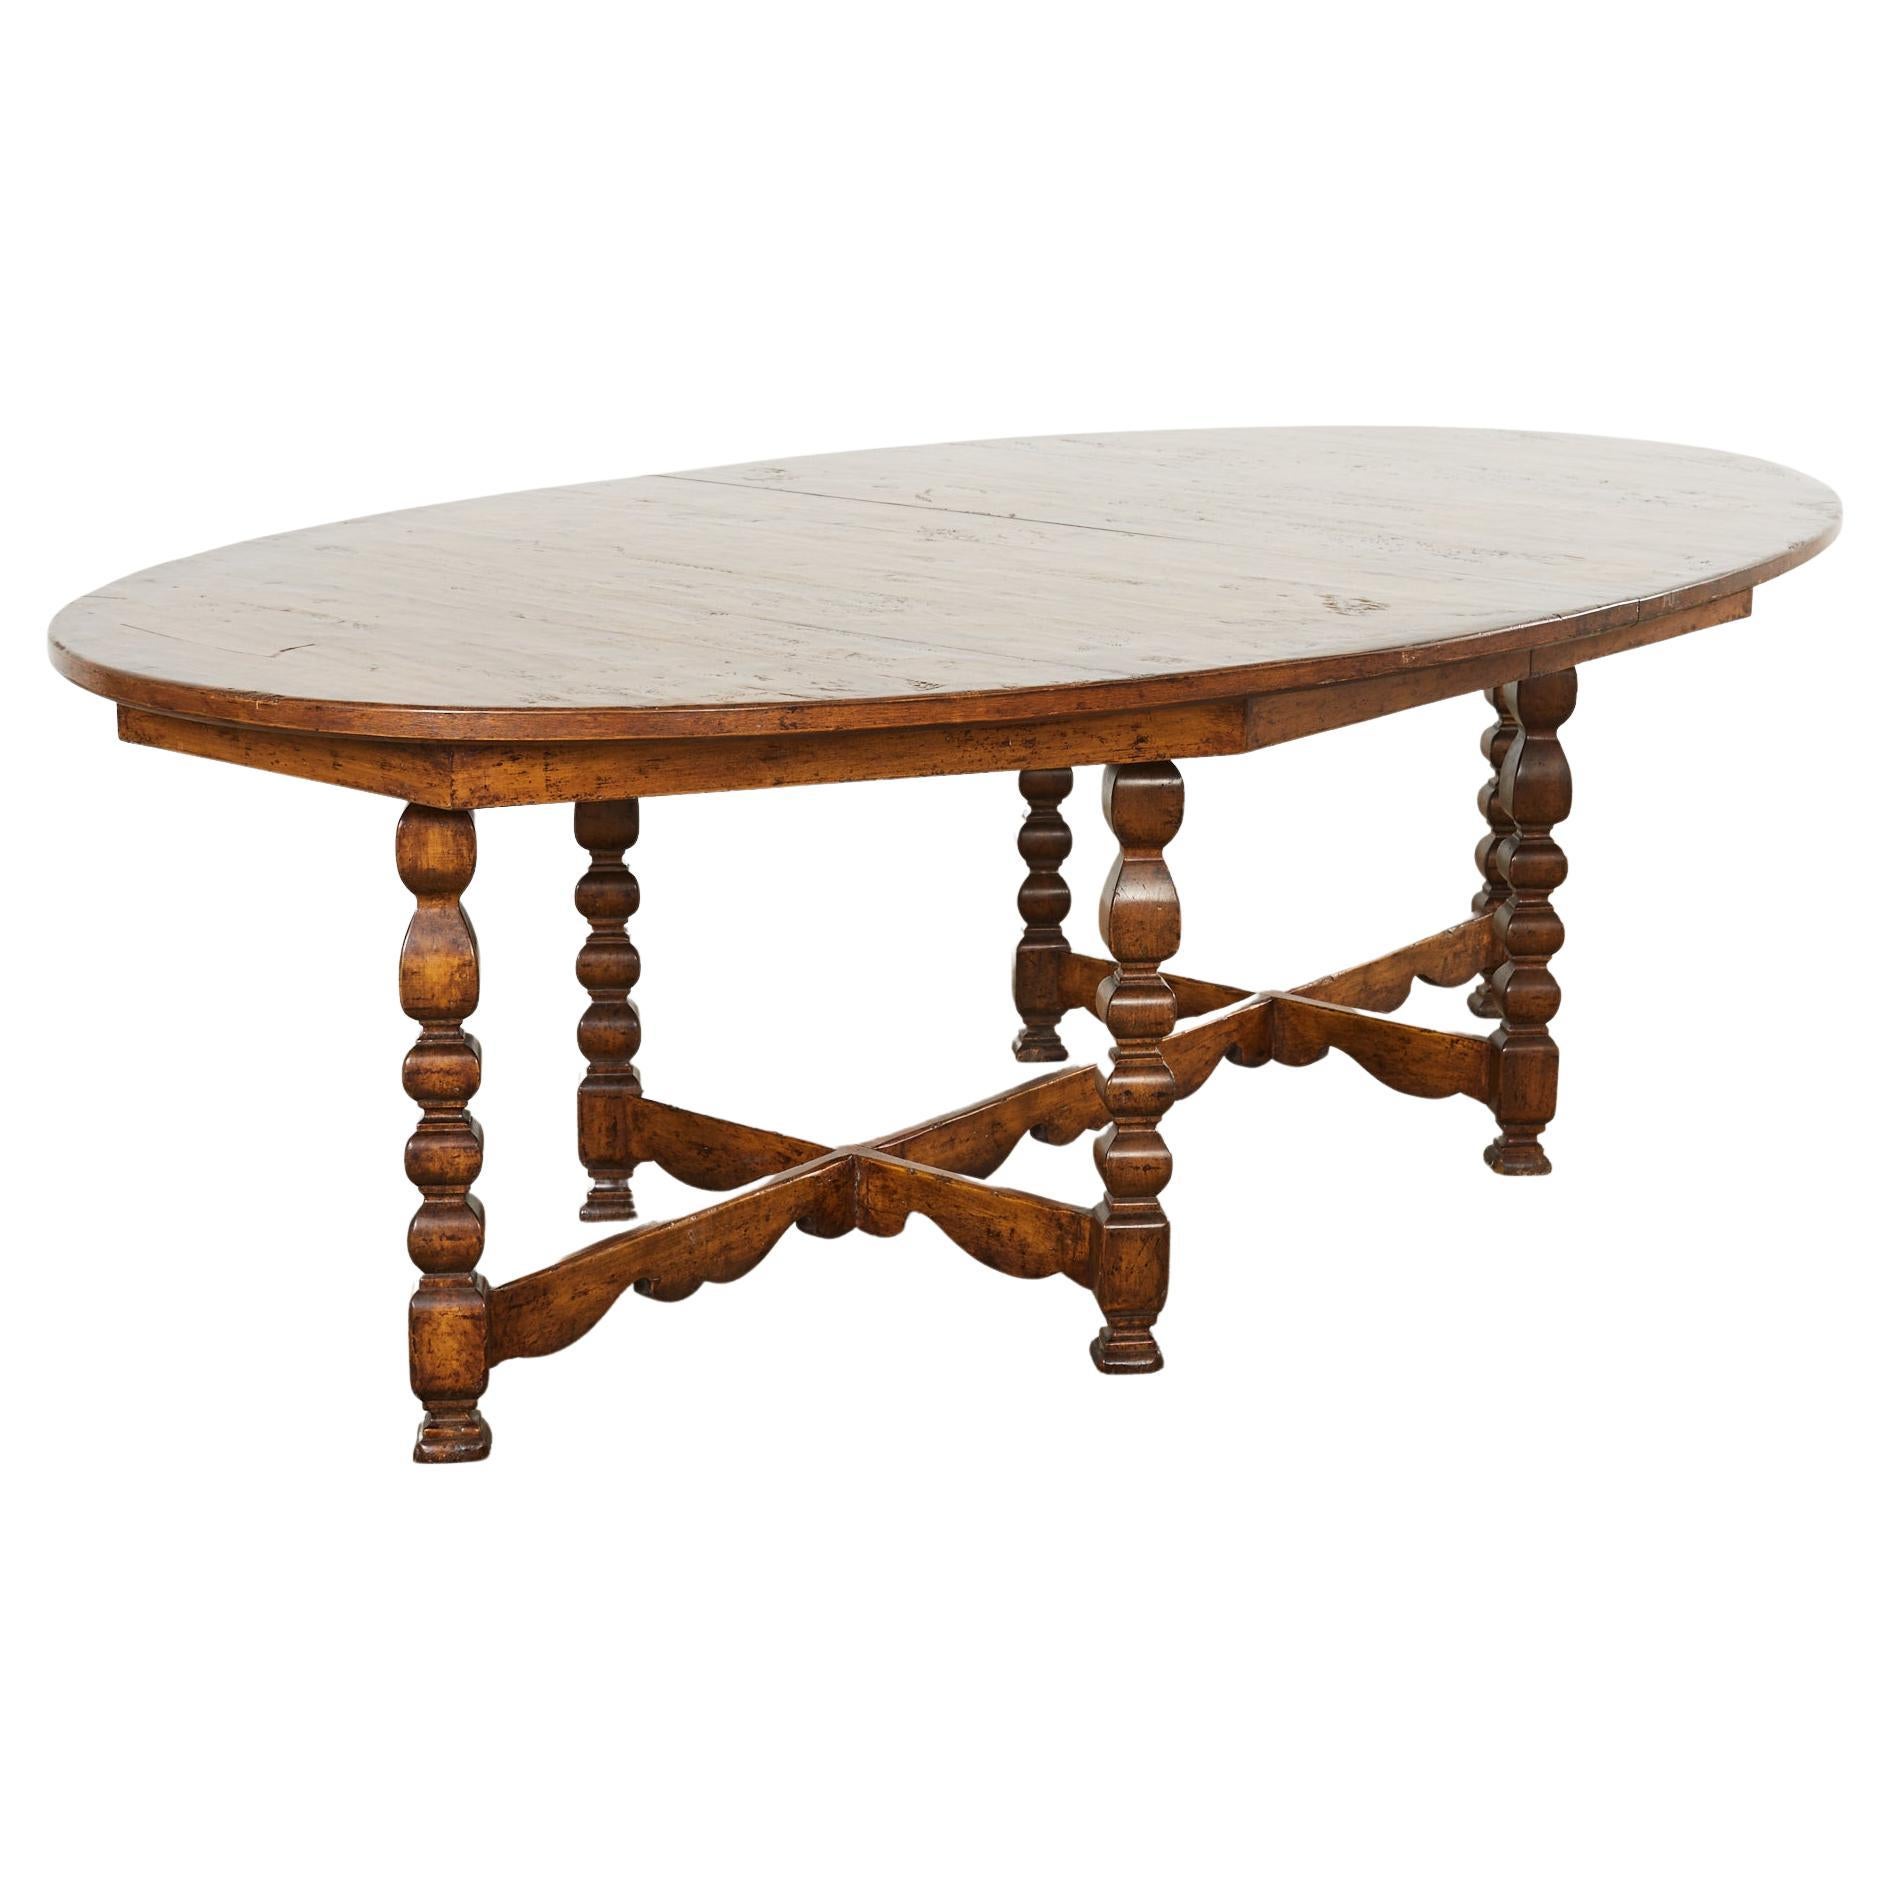 Distinctive Spanish Baroque style dining table designed by Dennis & Leen. The grand table features a large oval top supported by a six leg trestle base. The legs have a whimsical turned bobbin design with angular shapes conjoined by a long shaped